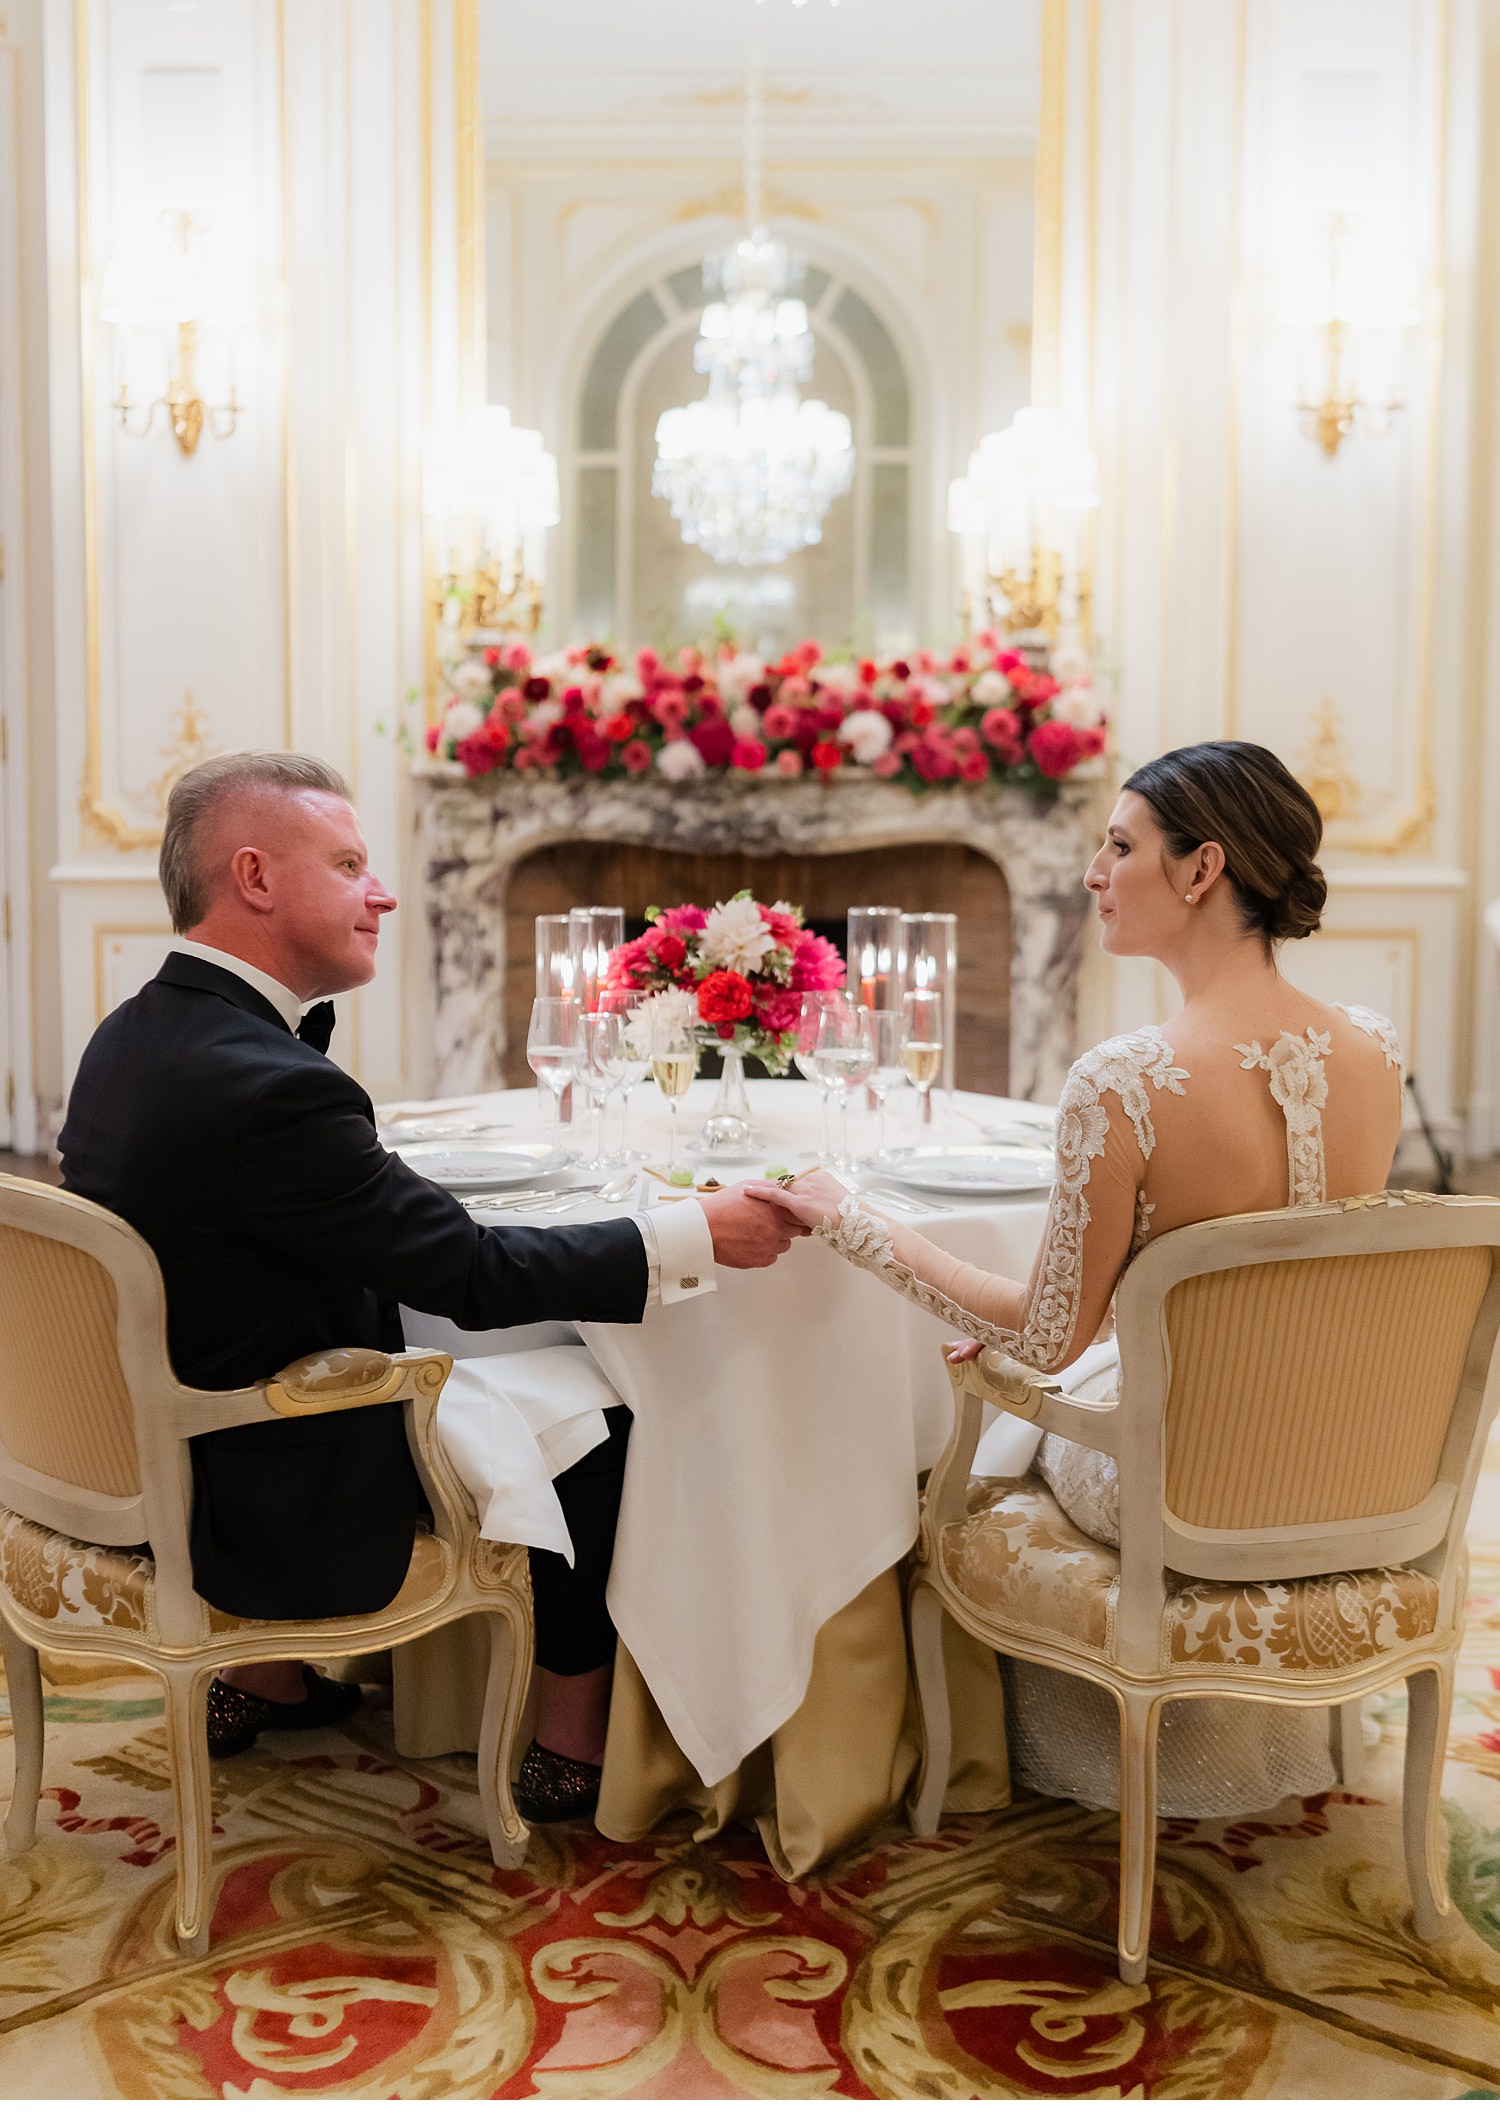 Elopement at the Ritz, Elope to Paris, Paris Photographer, Jazz around Midnight play for the bride and groom on their elopement,